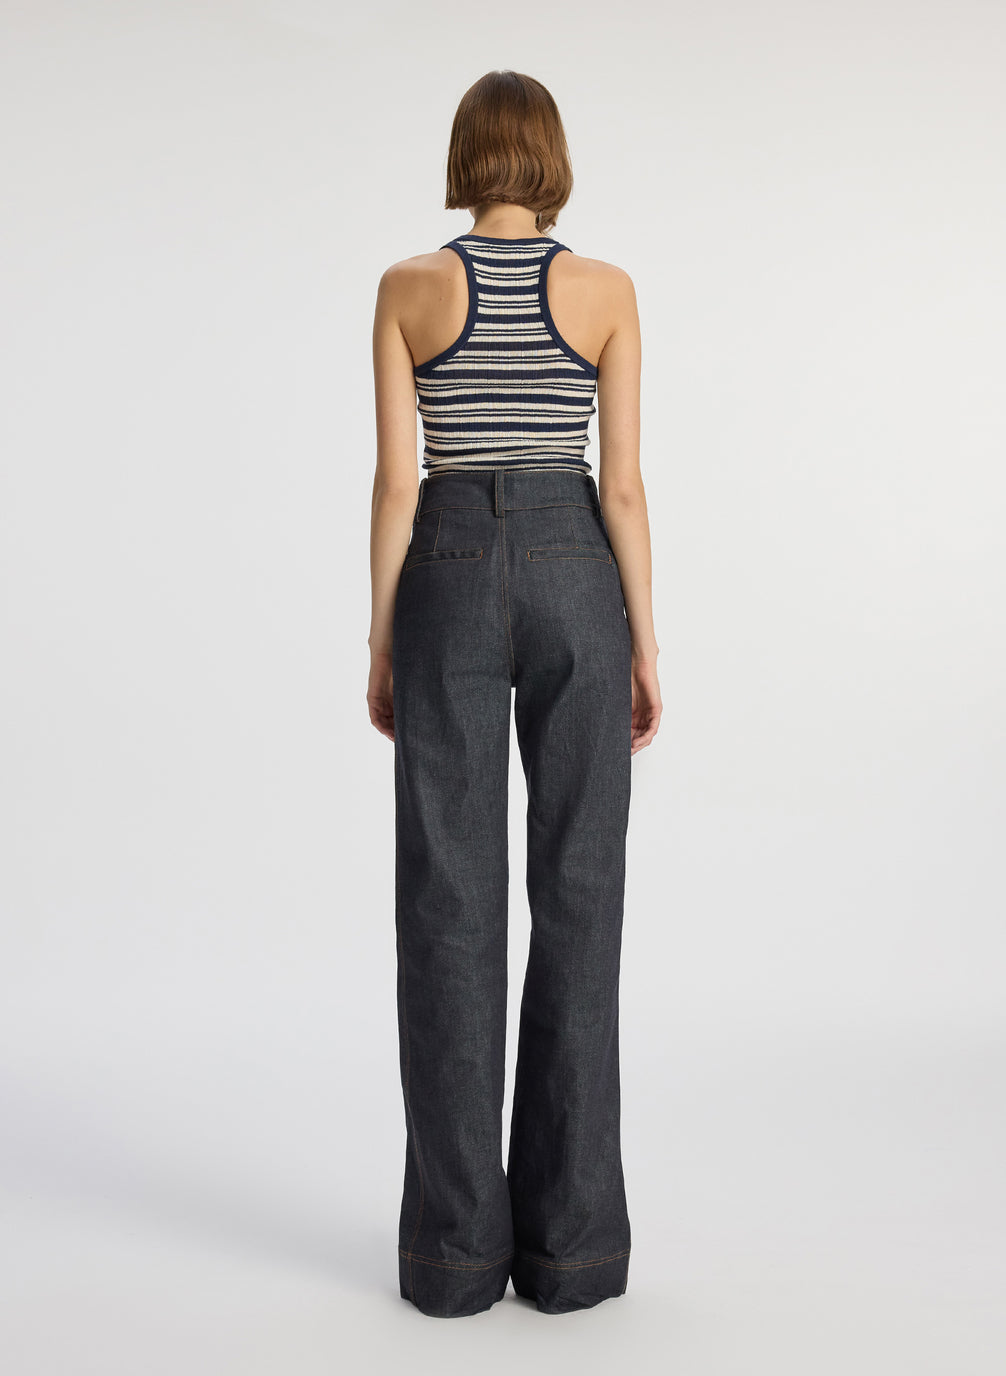 back view of woman wearing navy blue and white striped tank top with wide leg raw denim dark wash jeans